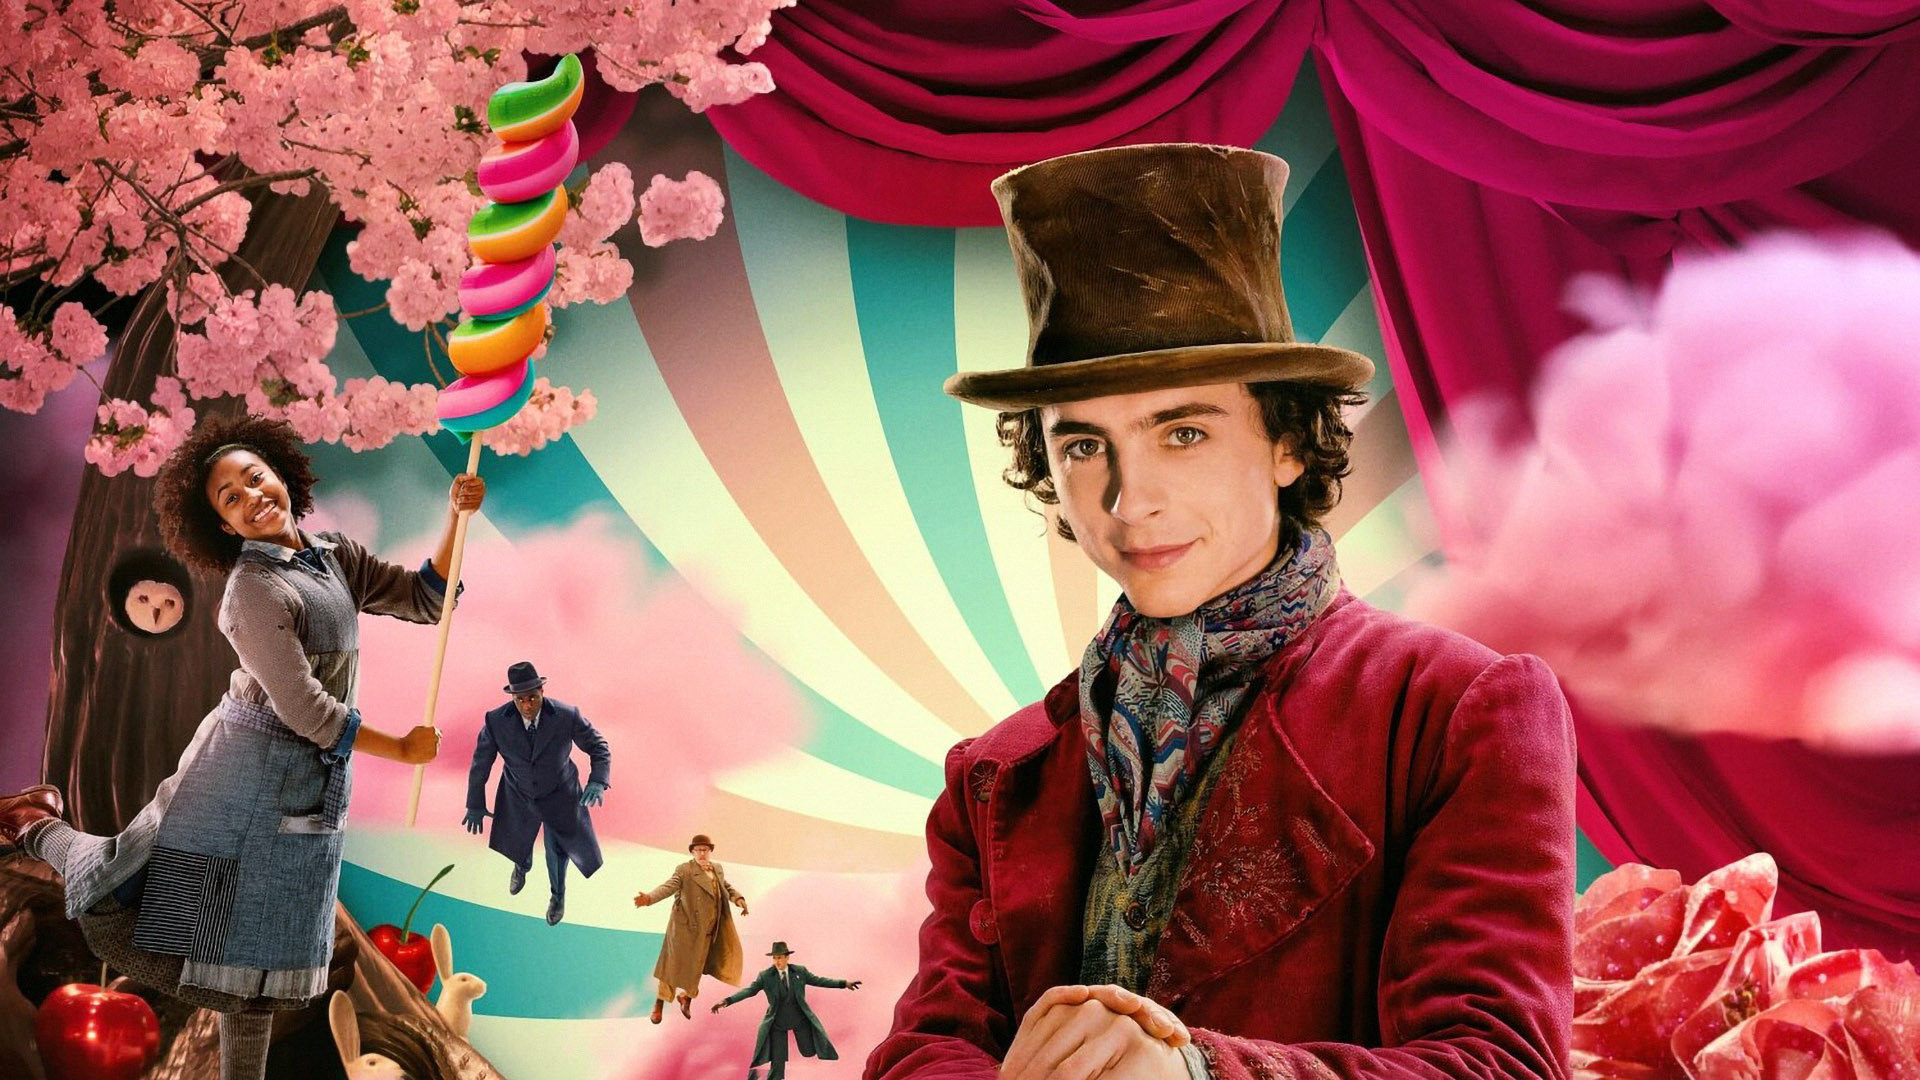 The Creative Way Timothée Chalamet Honored the Wonka Source Story